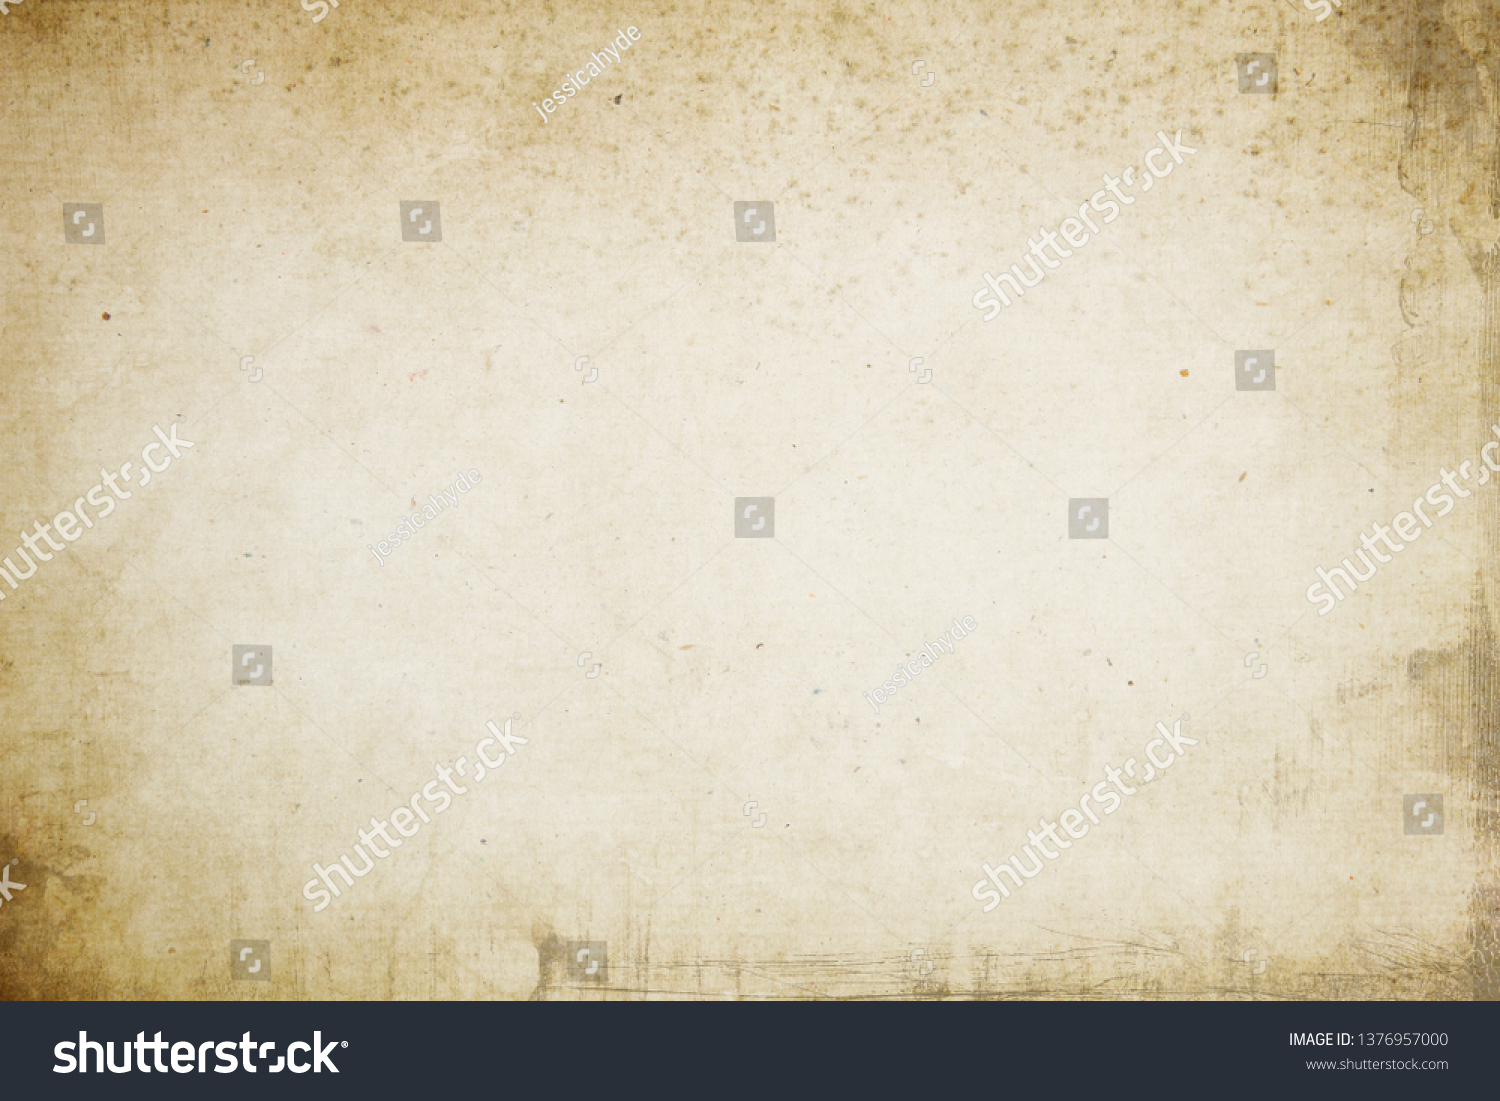 old paper texture or background  #1376957000